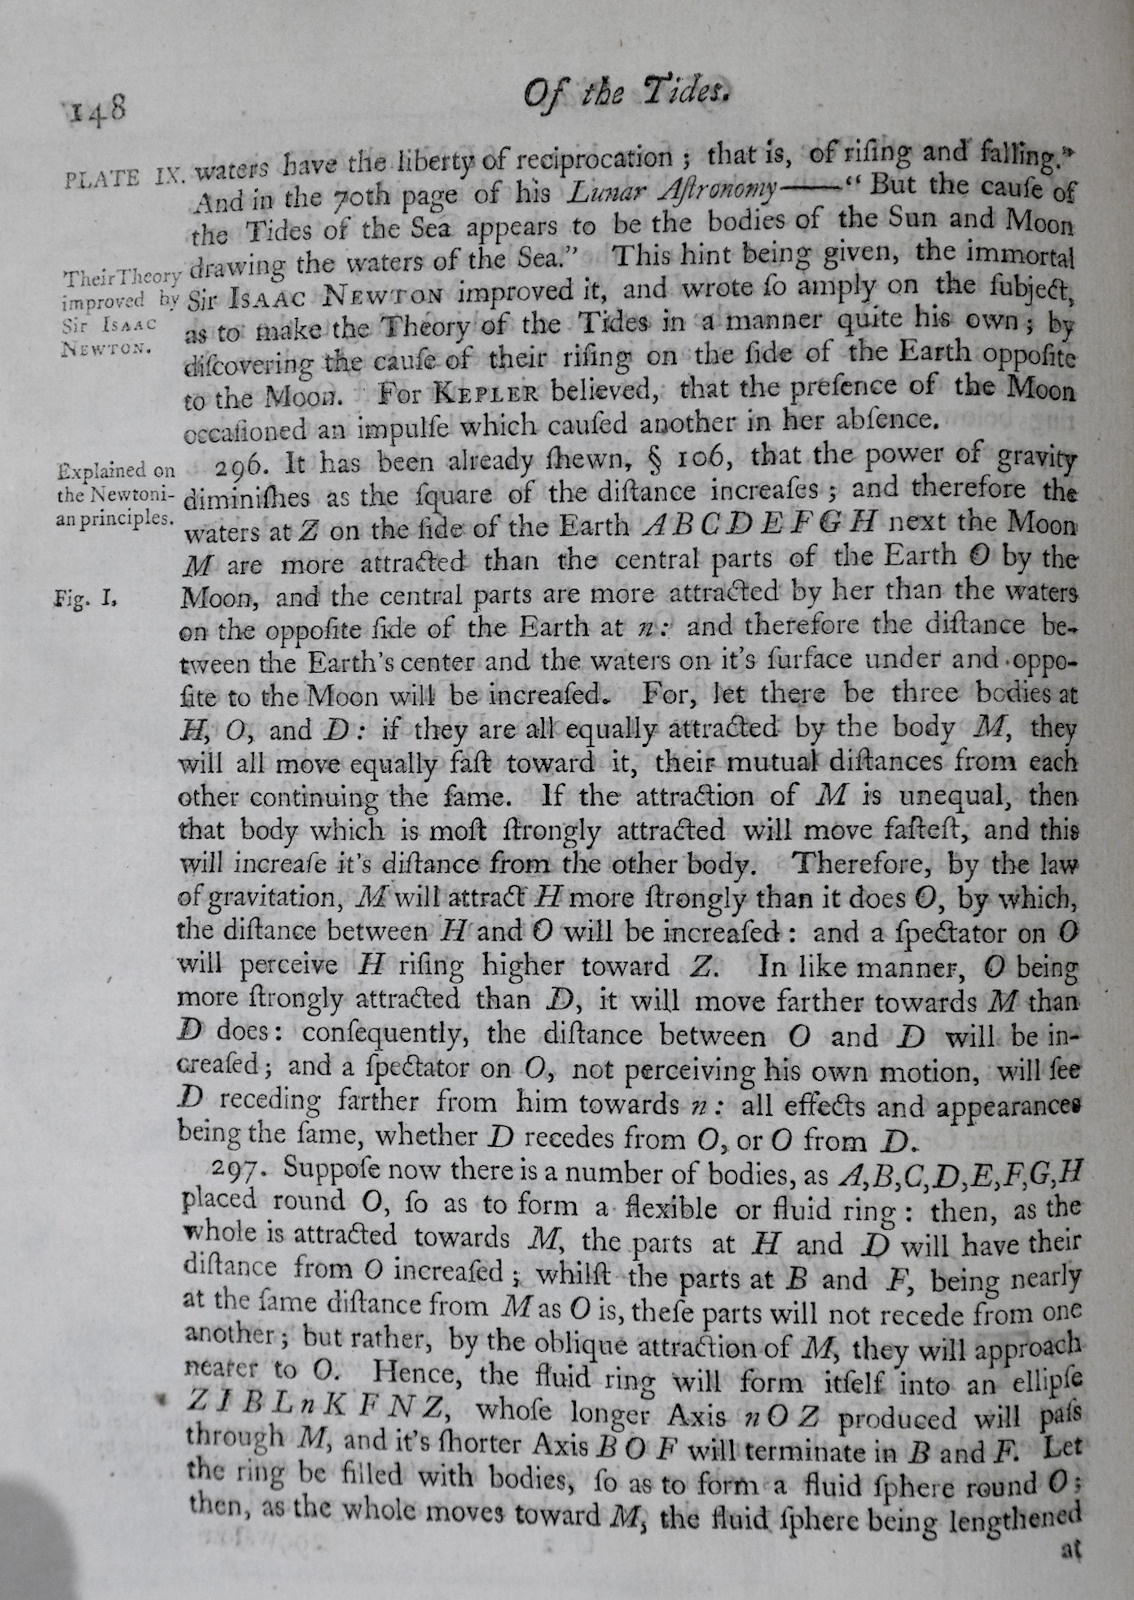 Image of page 148 from Ferguson's Astronomy, third edition, 1764